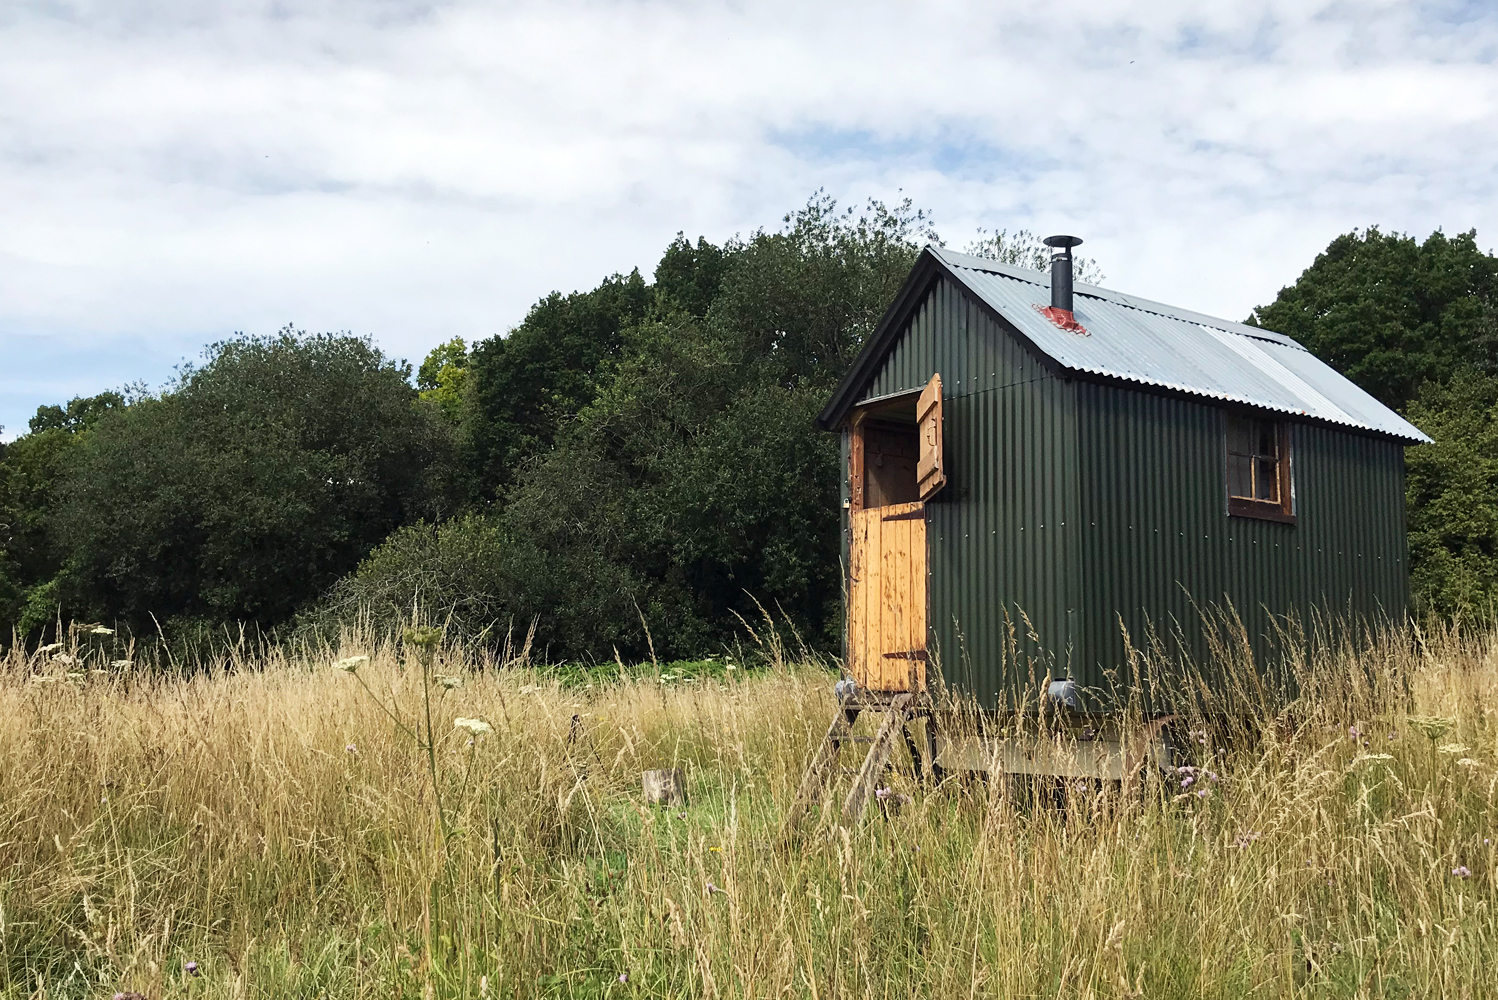 Little Sheepwash with open stable door, side window and chimney for the woodburning stove visible, and surrounded by wild flowers and grasses with woodland behind it. Our oldest shepherds hut and ideal for an authentic shepherds hut holiday